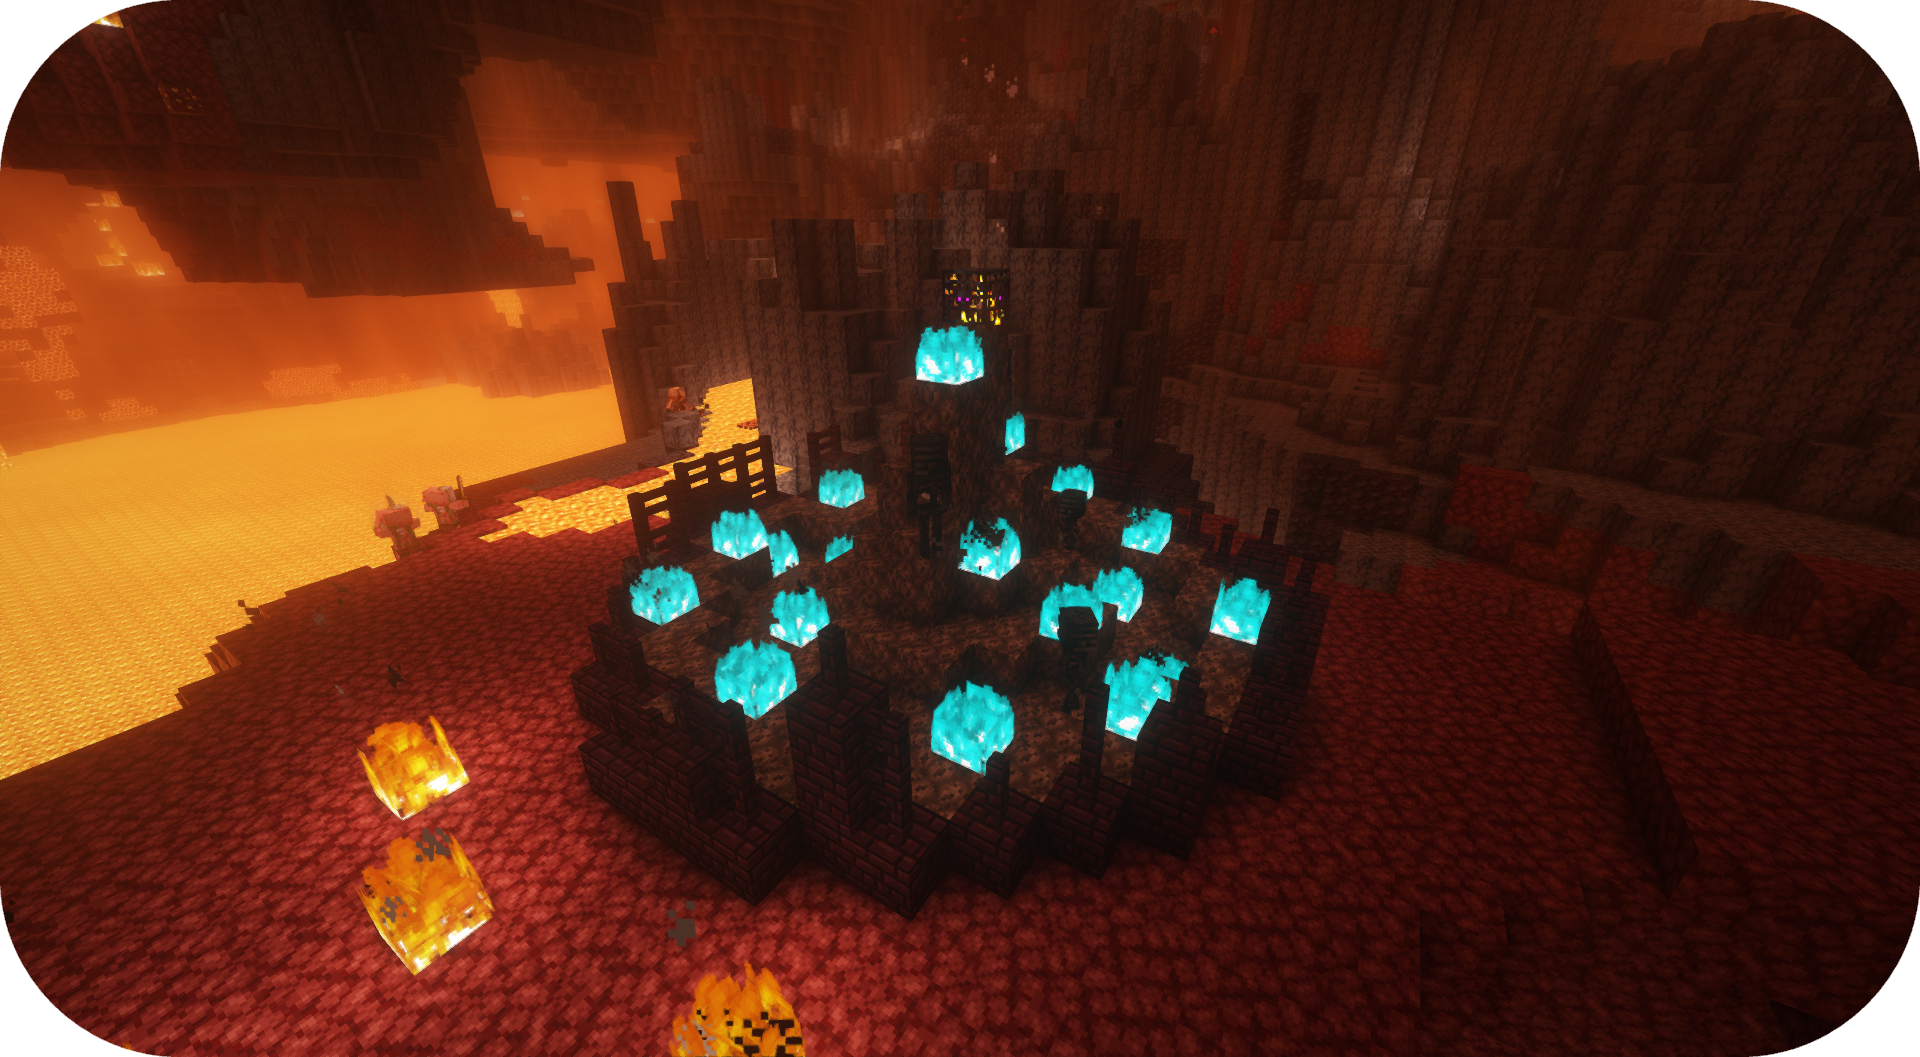 Deadly arena with wither enemies